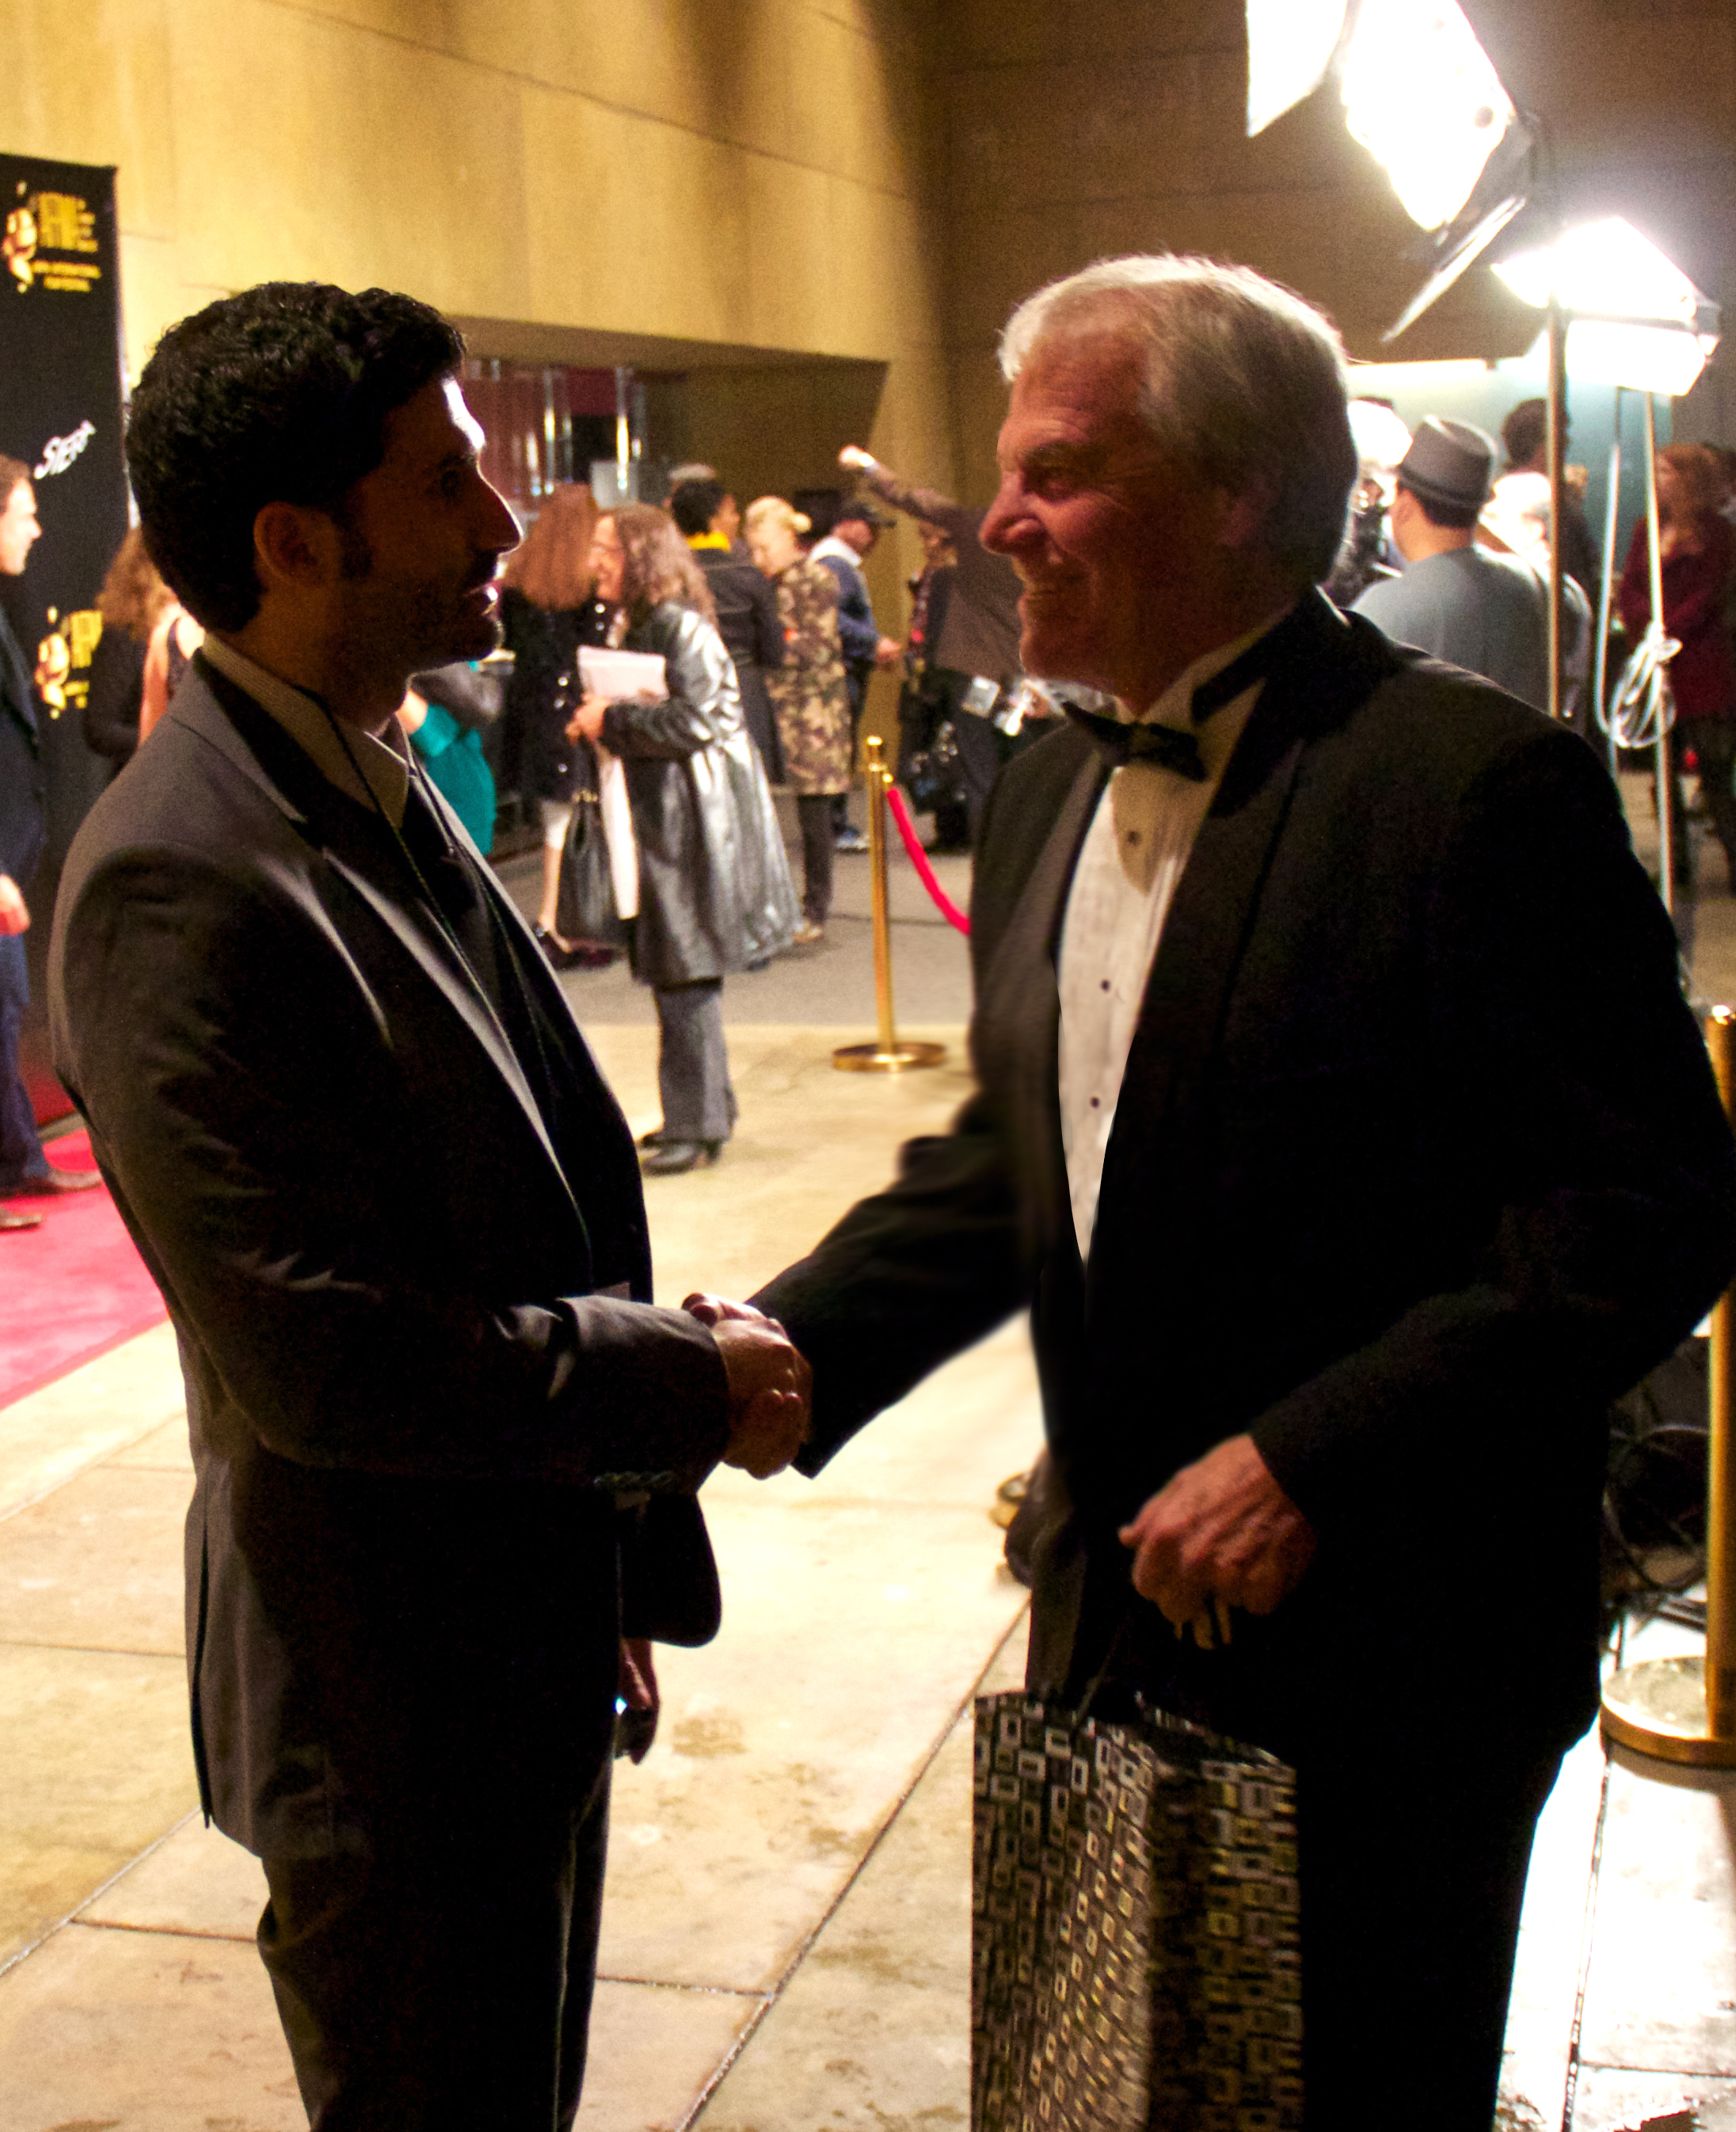 James Jay Ellis - Director, HYE POWER Music Video with Nazo Bravo - ARPA 2012 Film Festival Egyptian Theater Hollywood